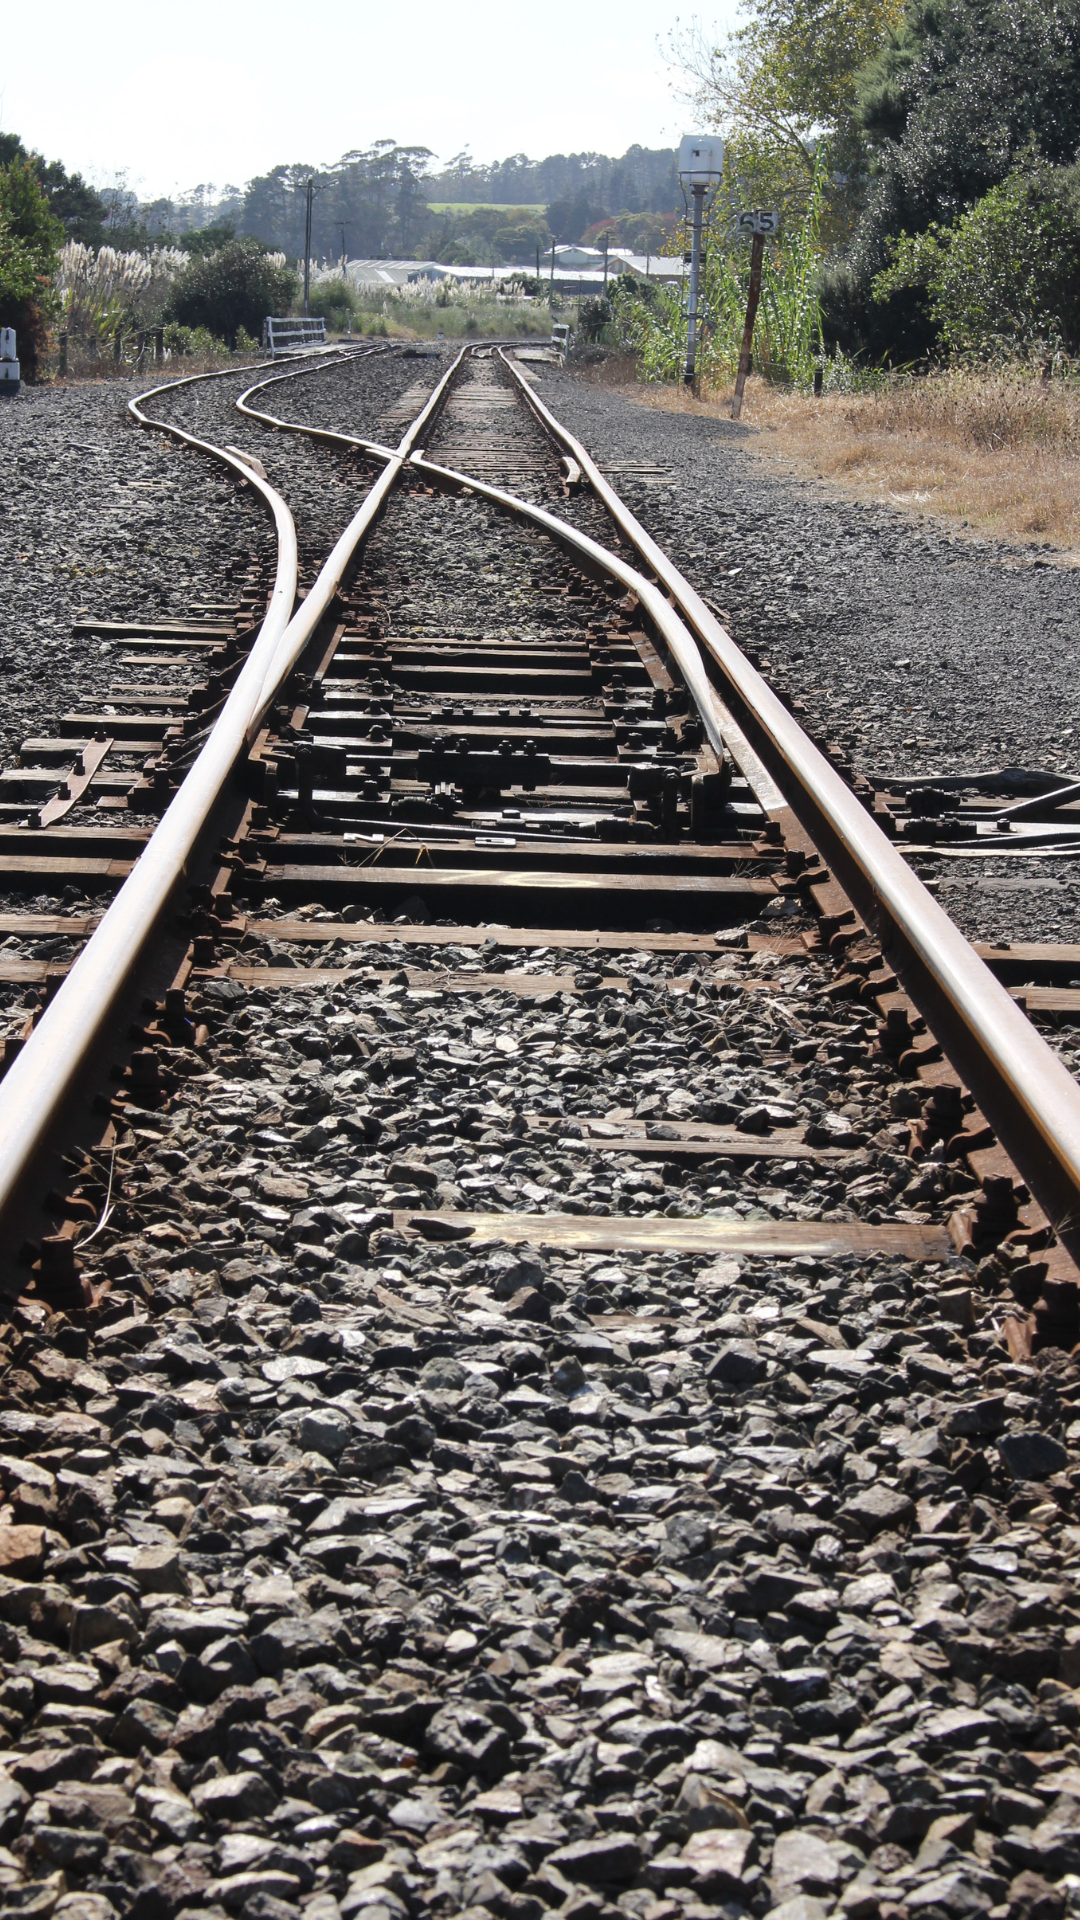 Do you know why railway tracks have crushed stones alongside?